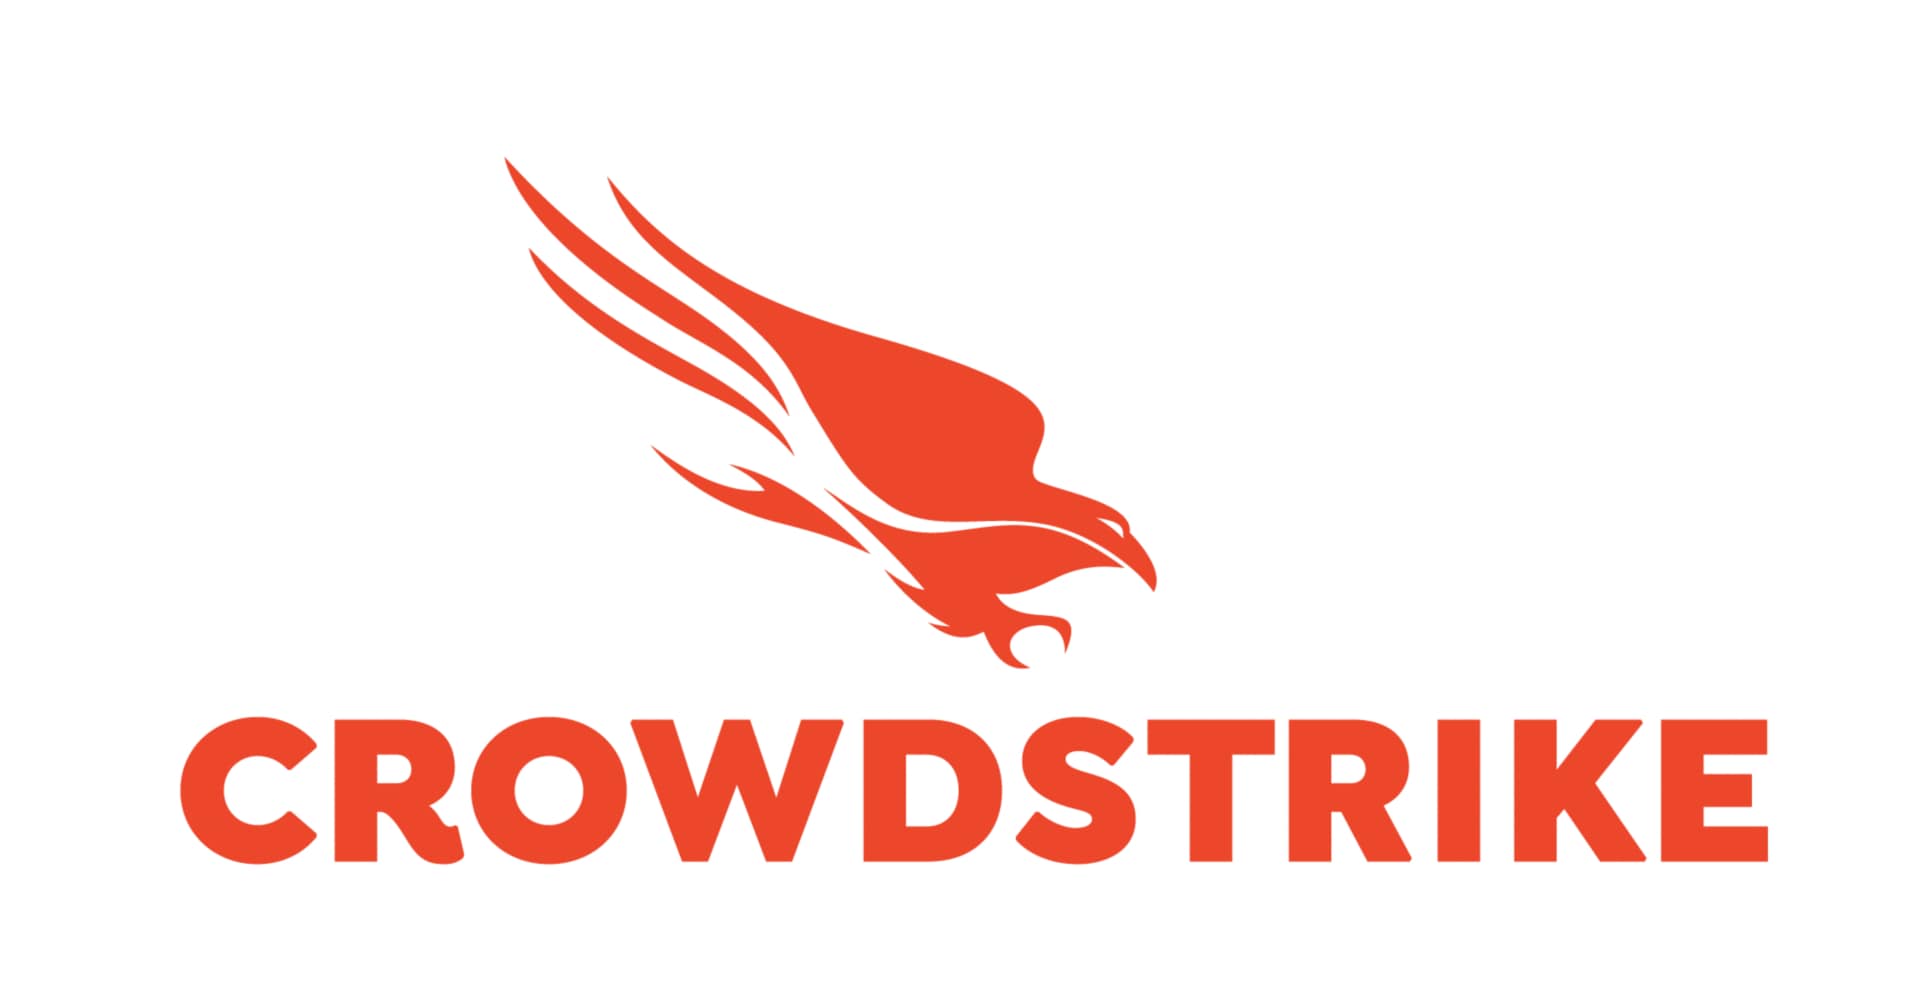 CrowdStrike 24-Month Falcon Cloud Security Reserved - Flex Software